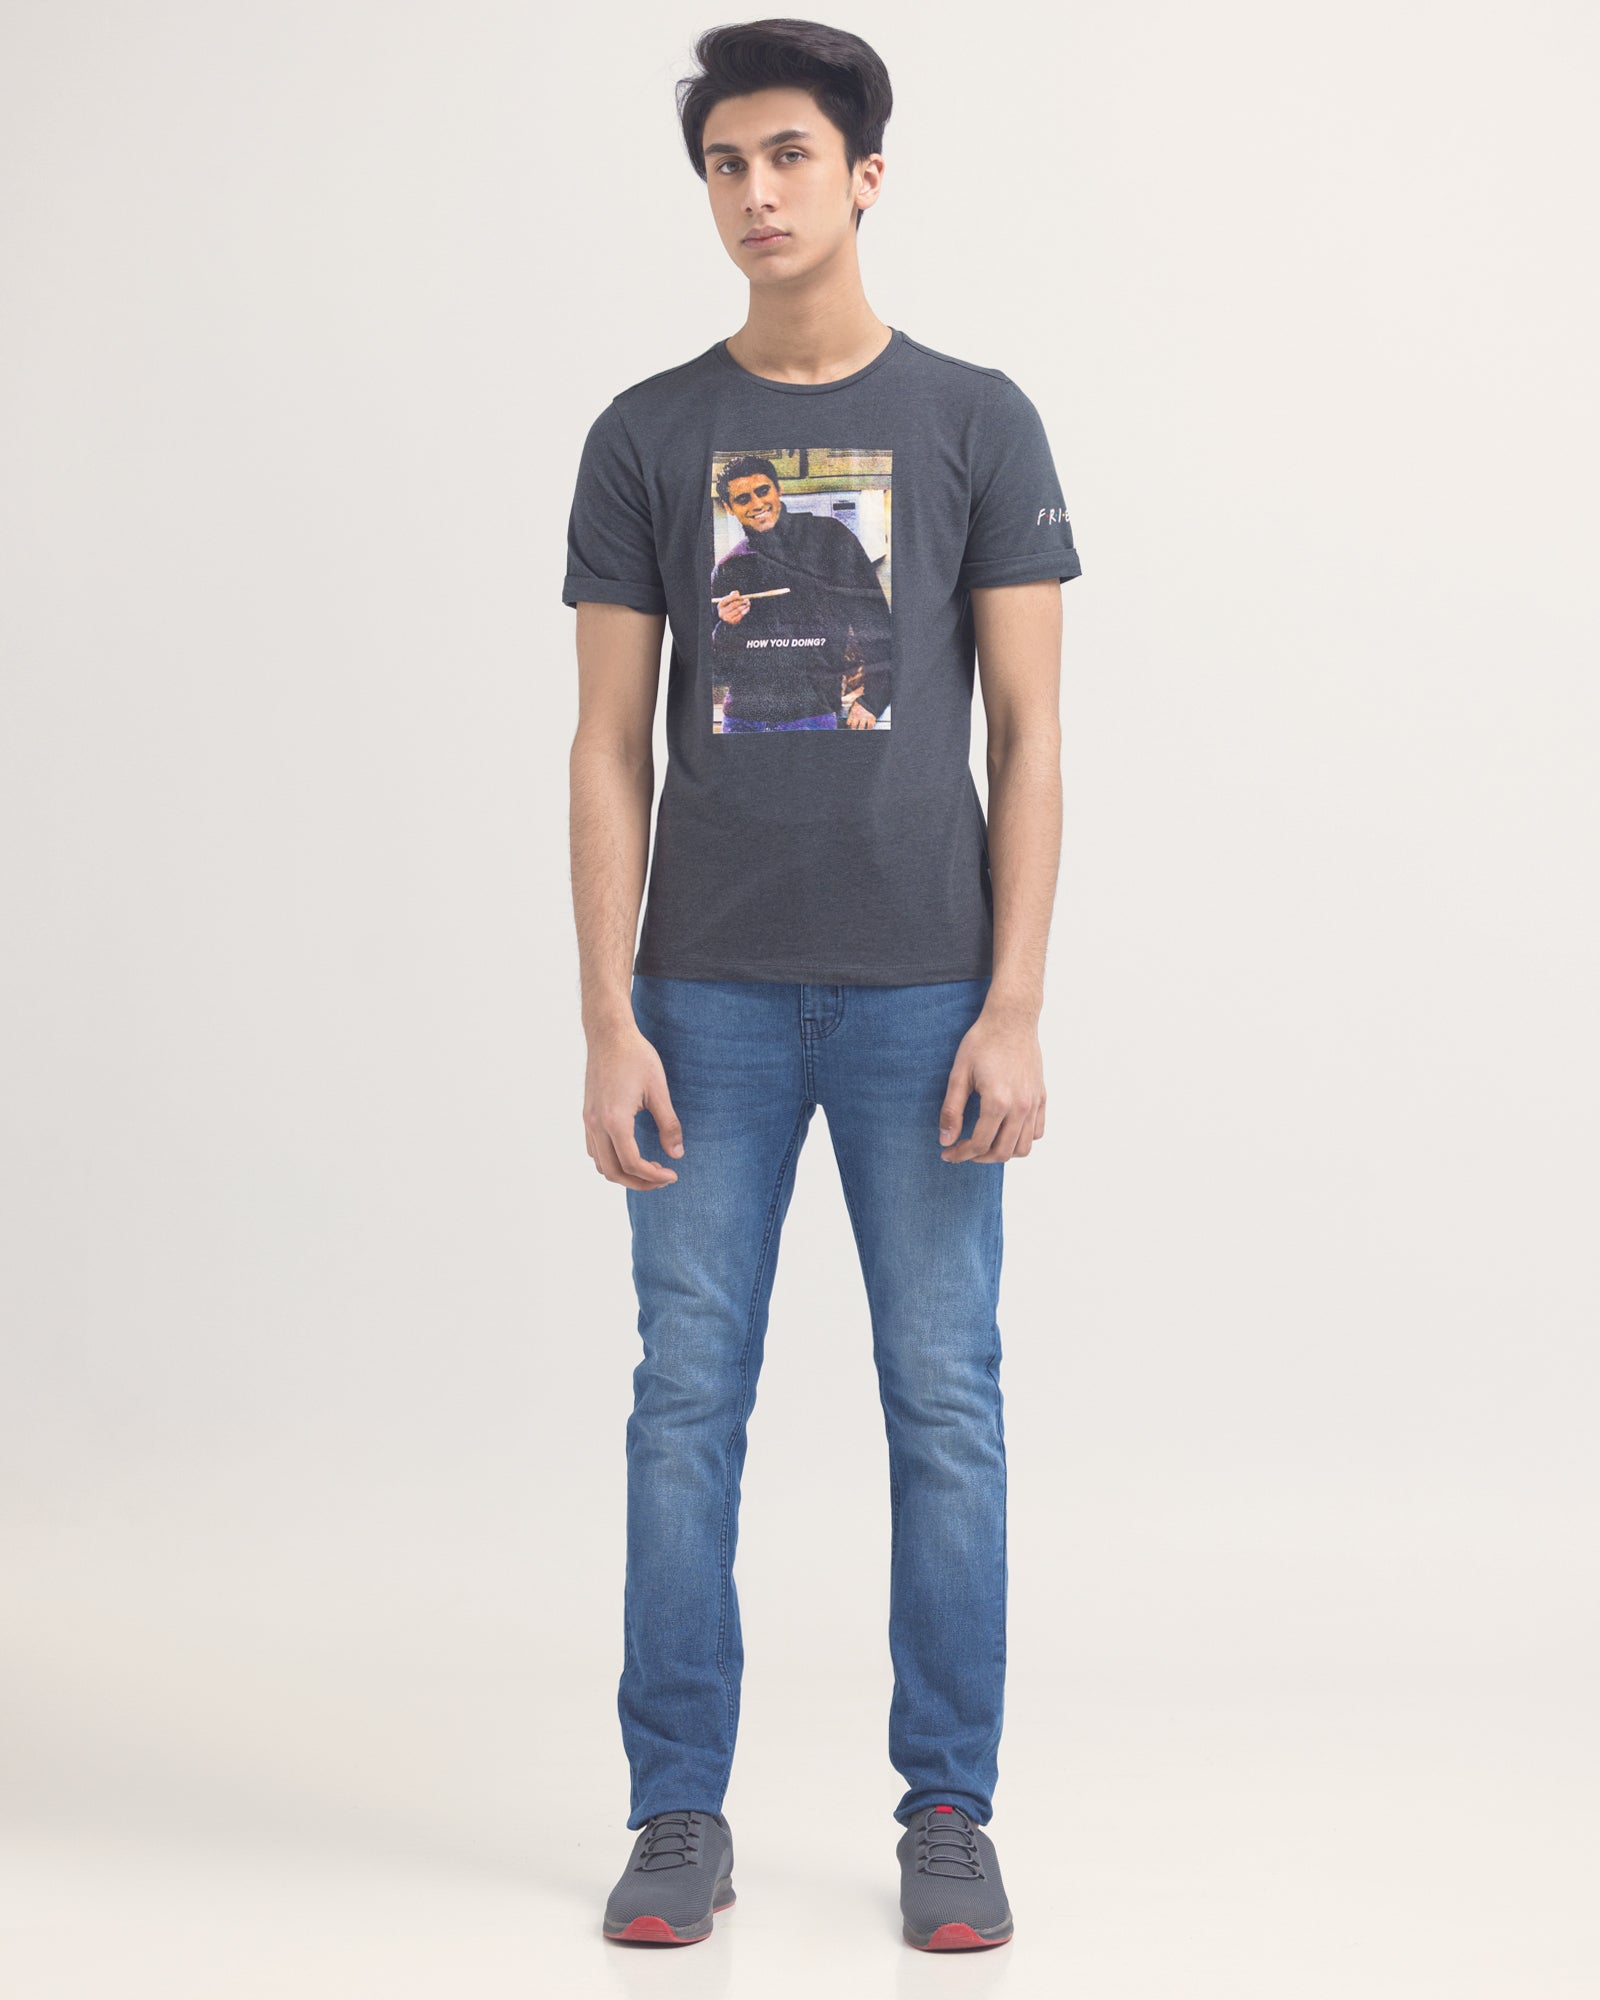 F.R.I.E.N.D.S Tee For MEN - ENGINE